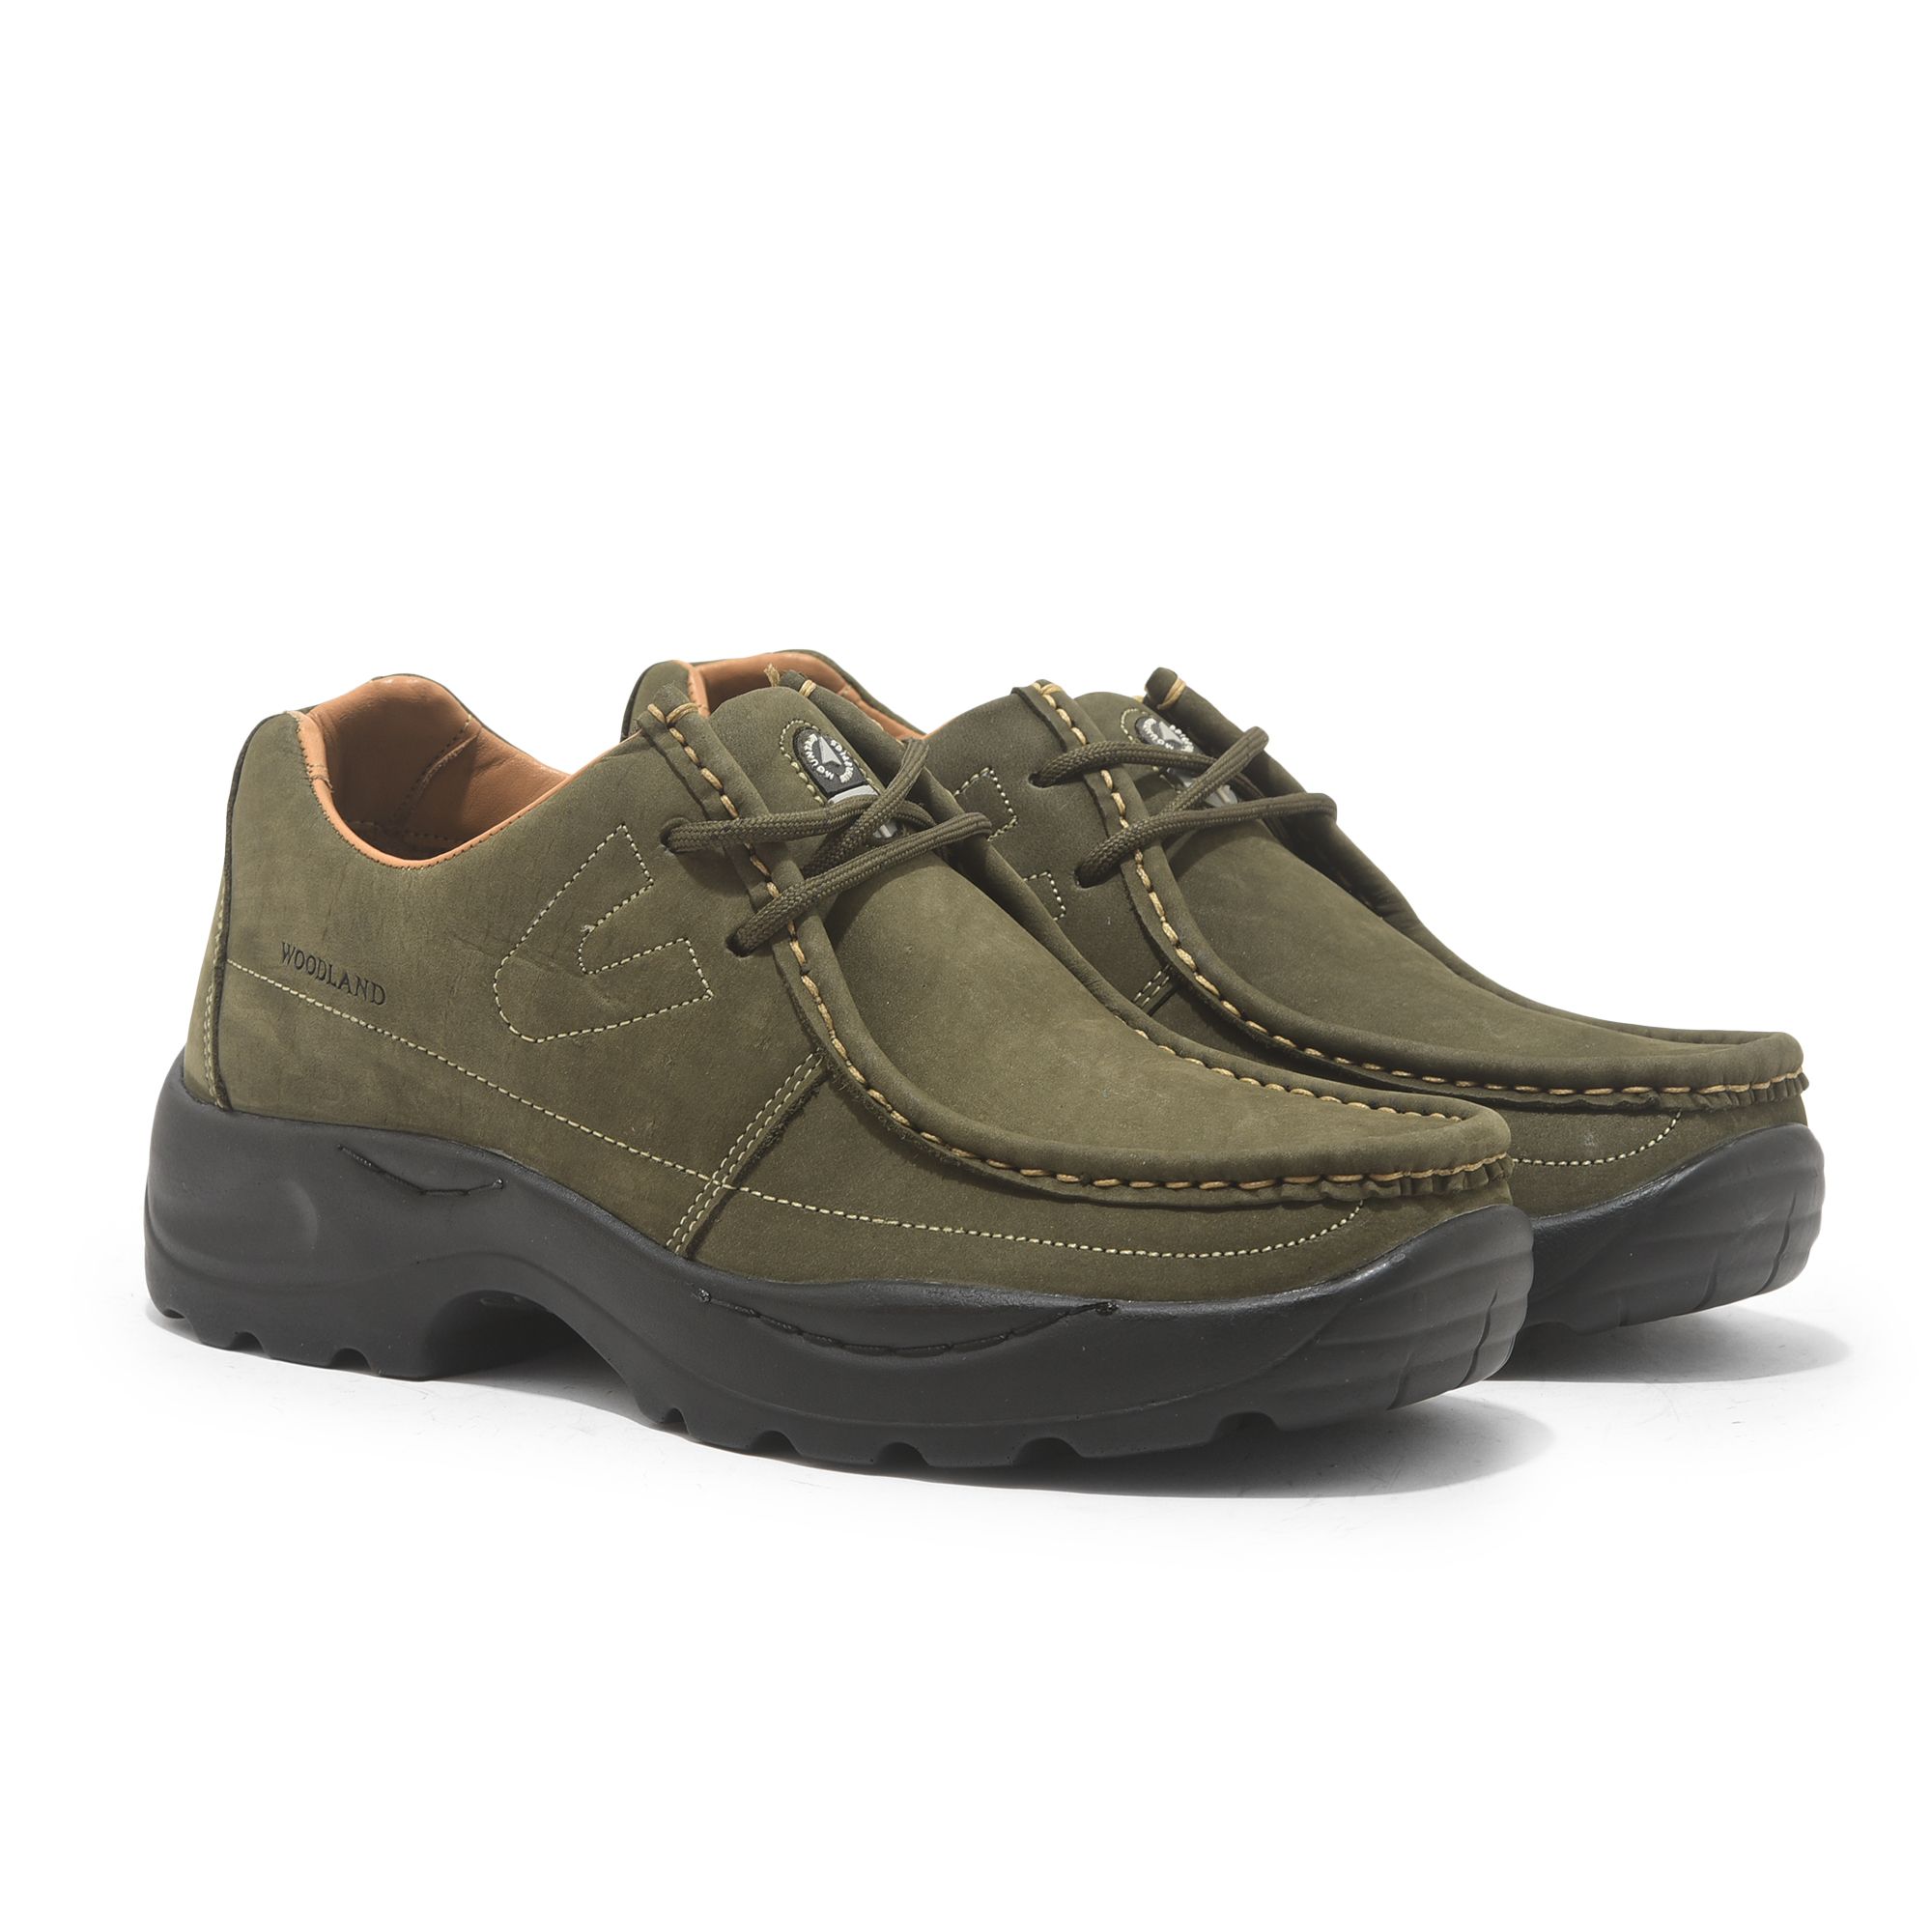 OLIVE casual leather shoes